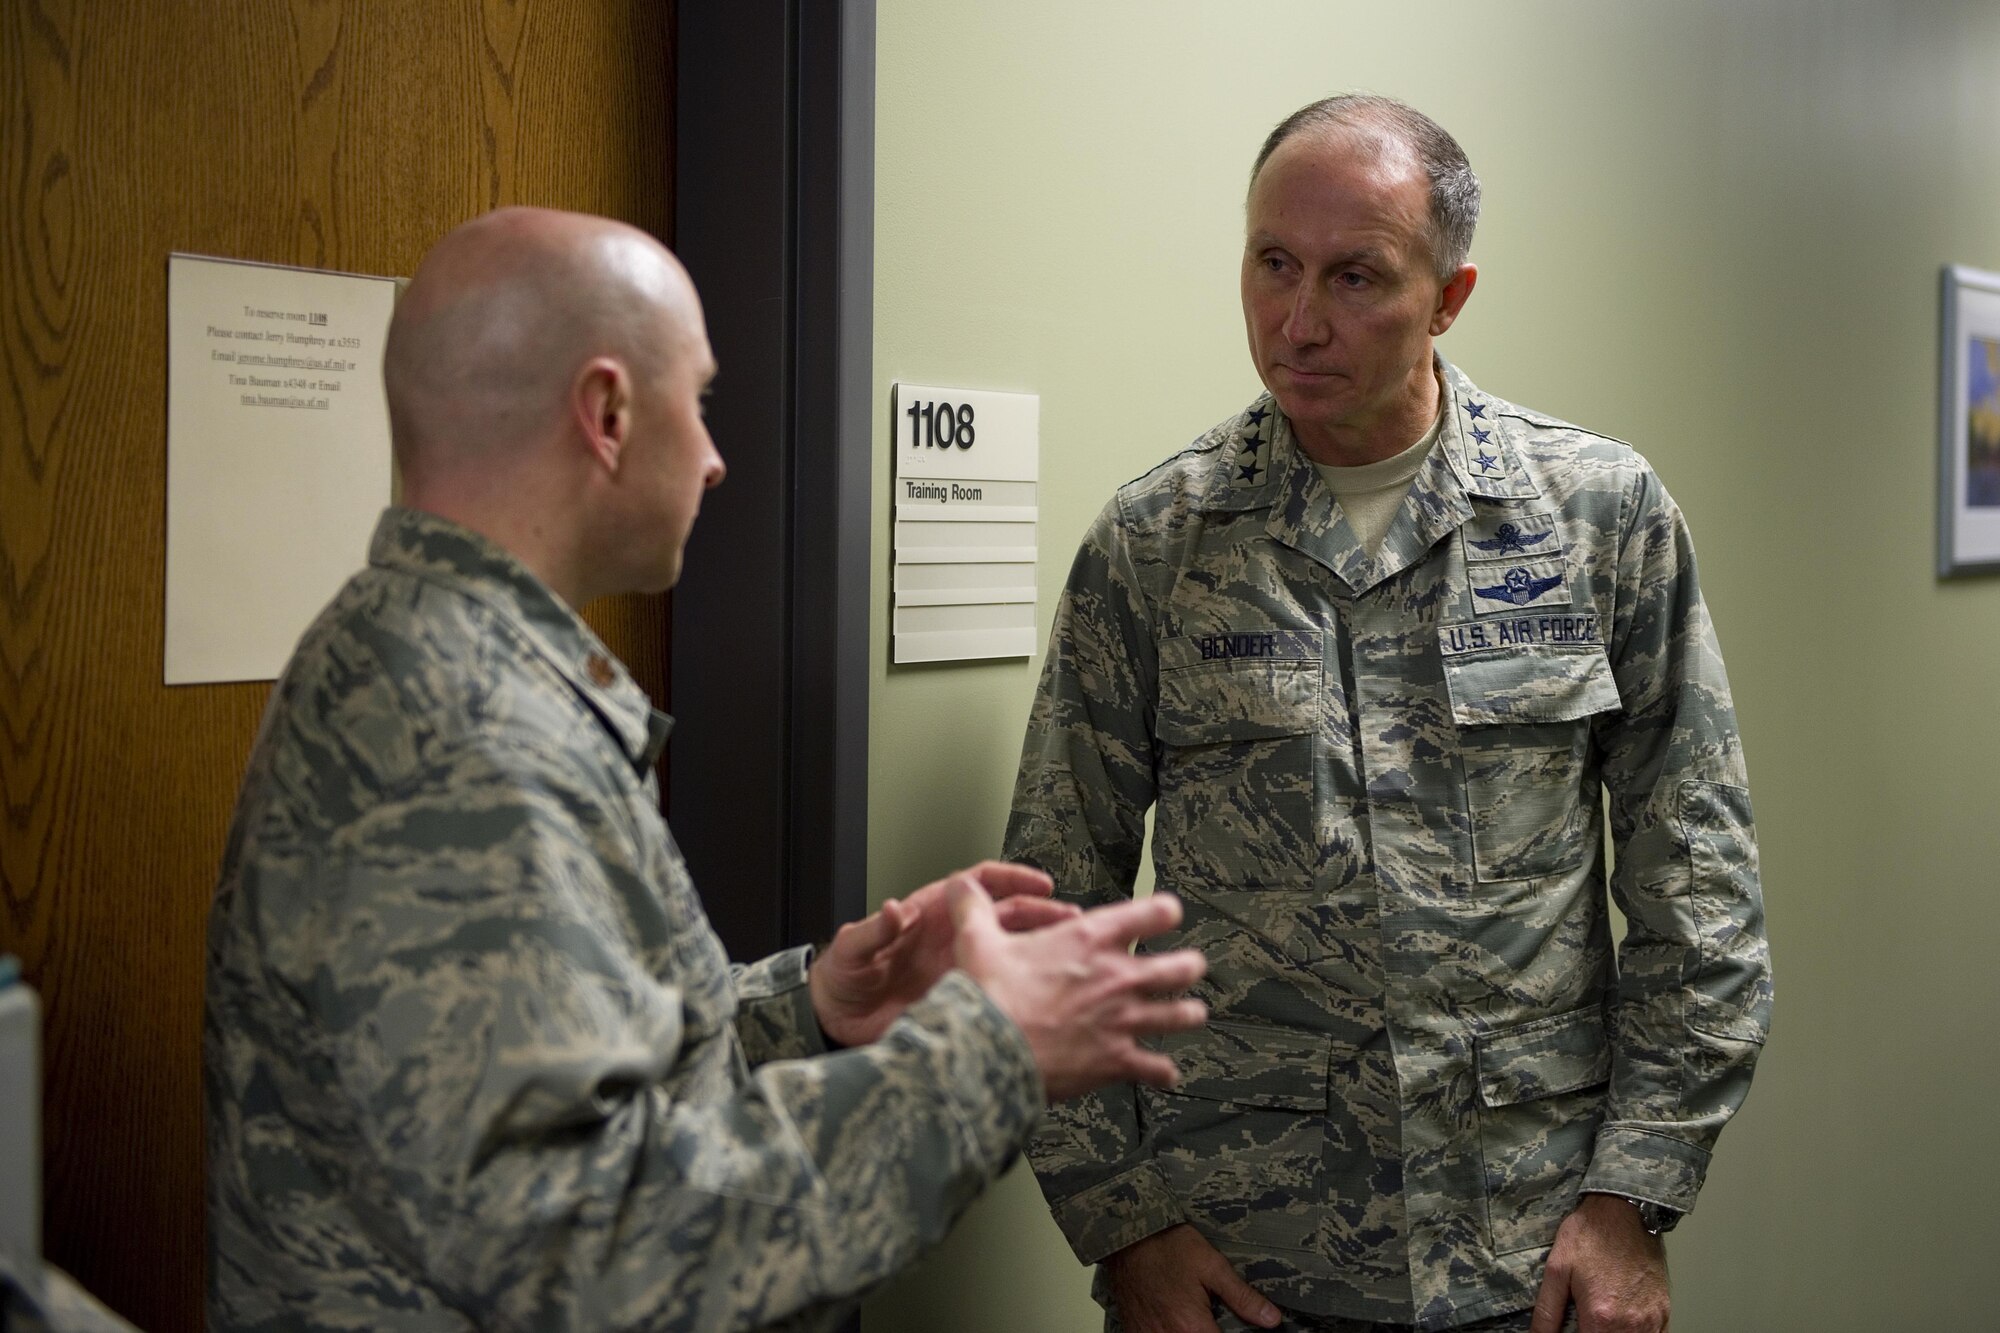 Maj. Denney Neace, 434th Communications Squadron commander, speaks to Lt. Gen. Bill Bender, Air Force chief of information dominance and chief information officer, about their mission and capabilities during a visit at Grissom Air Reserve Base, Ind., Jan. 14, 2016. The 434th ARW was recently selected as one of two lead pilot squadrons in the Air Force Reserve Command to transition into a next generation communications squadron. (U.S. Air Force photo/Tech. Sgt. Benjamin Mota)